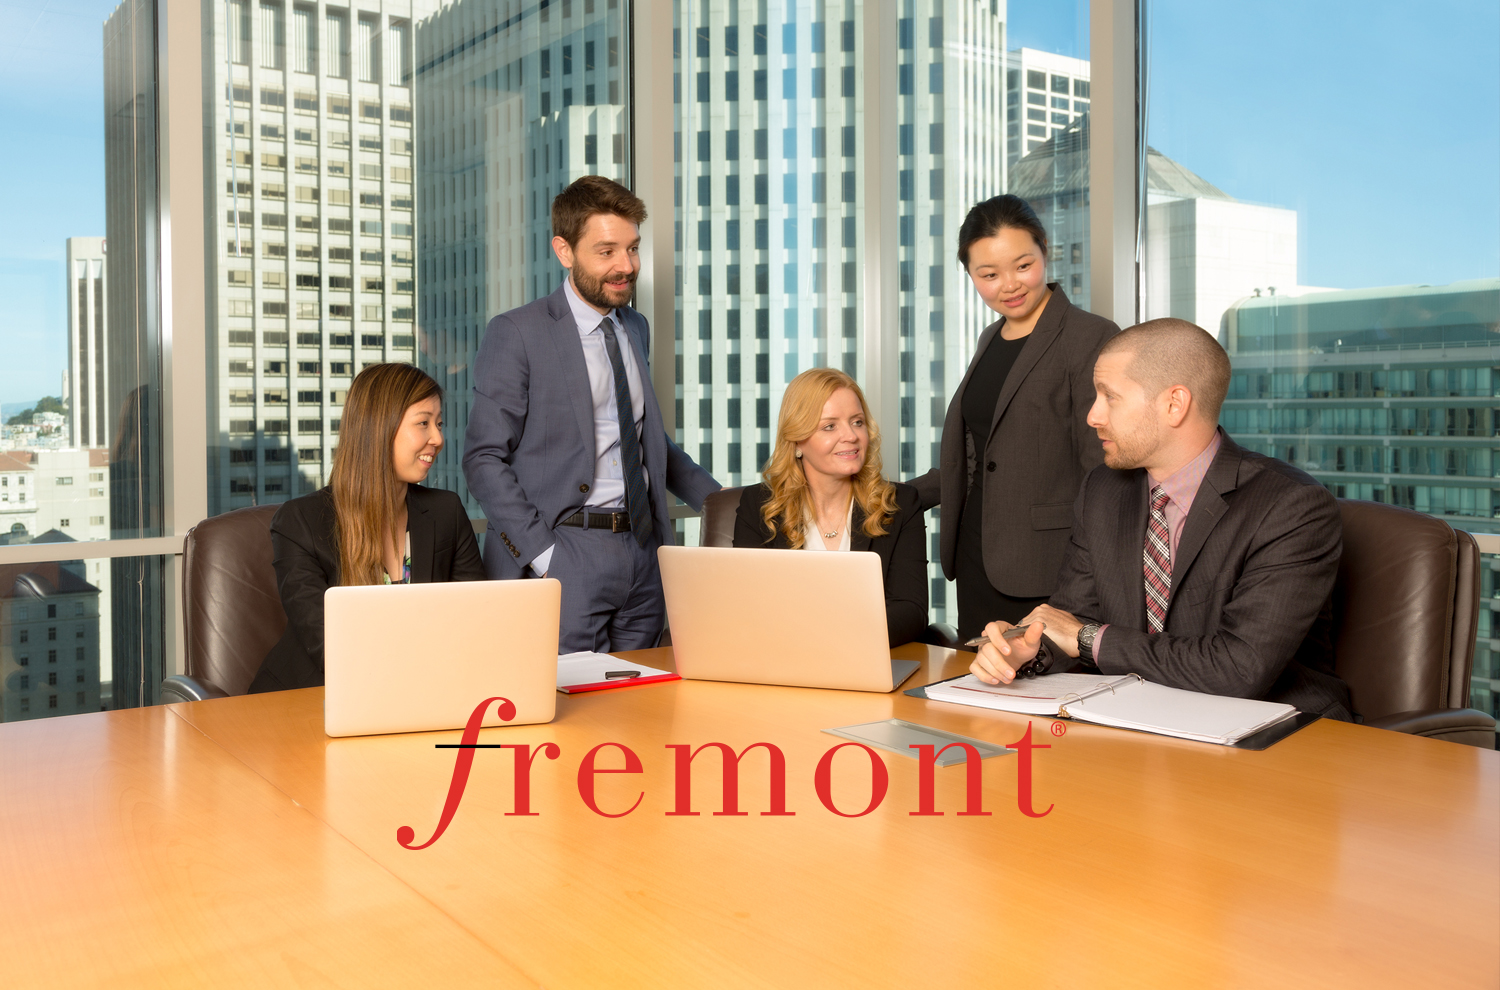 Members of the Fremont Group at a conference table